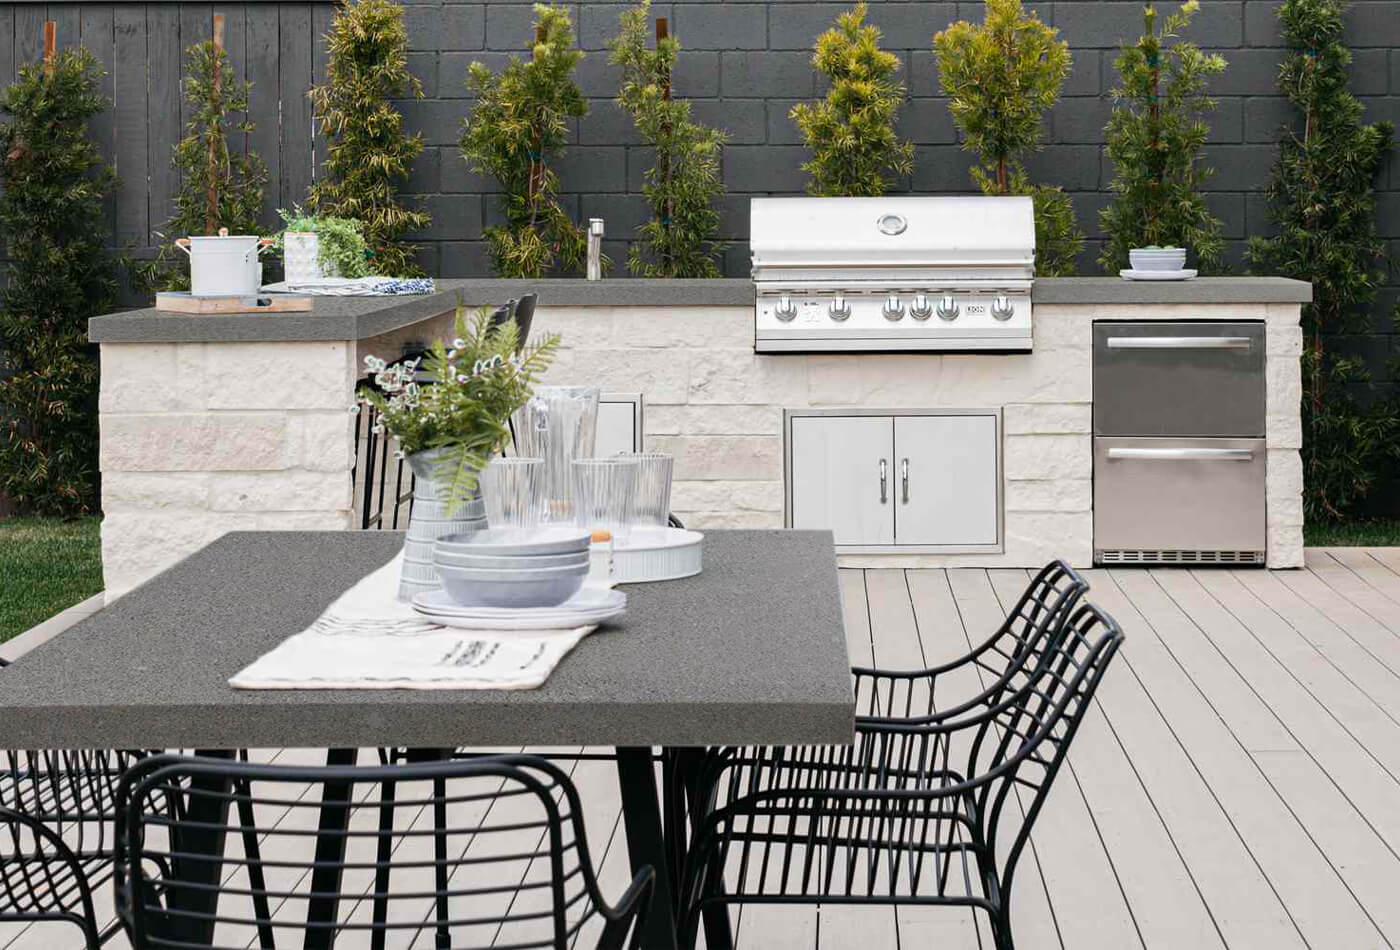 Can We Use This White Granite Outdoors